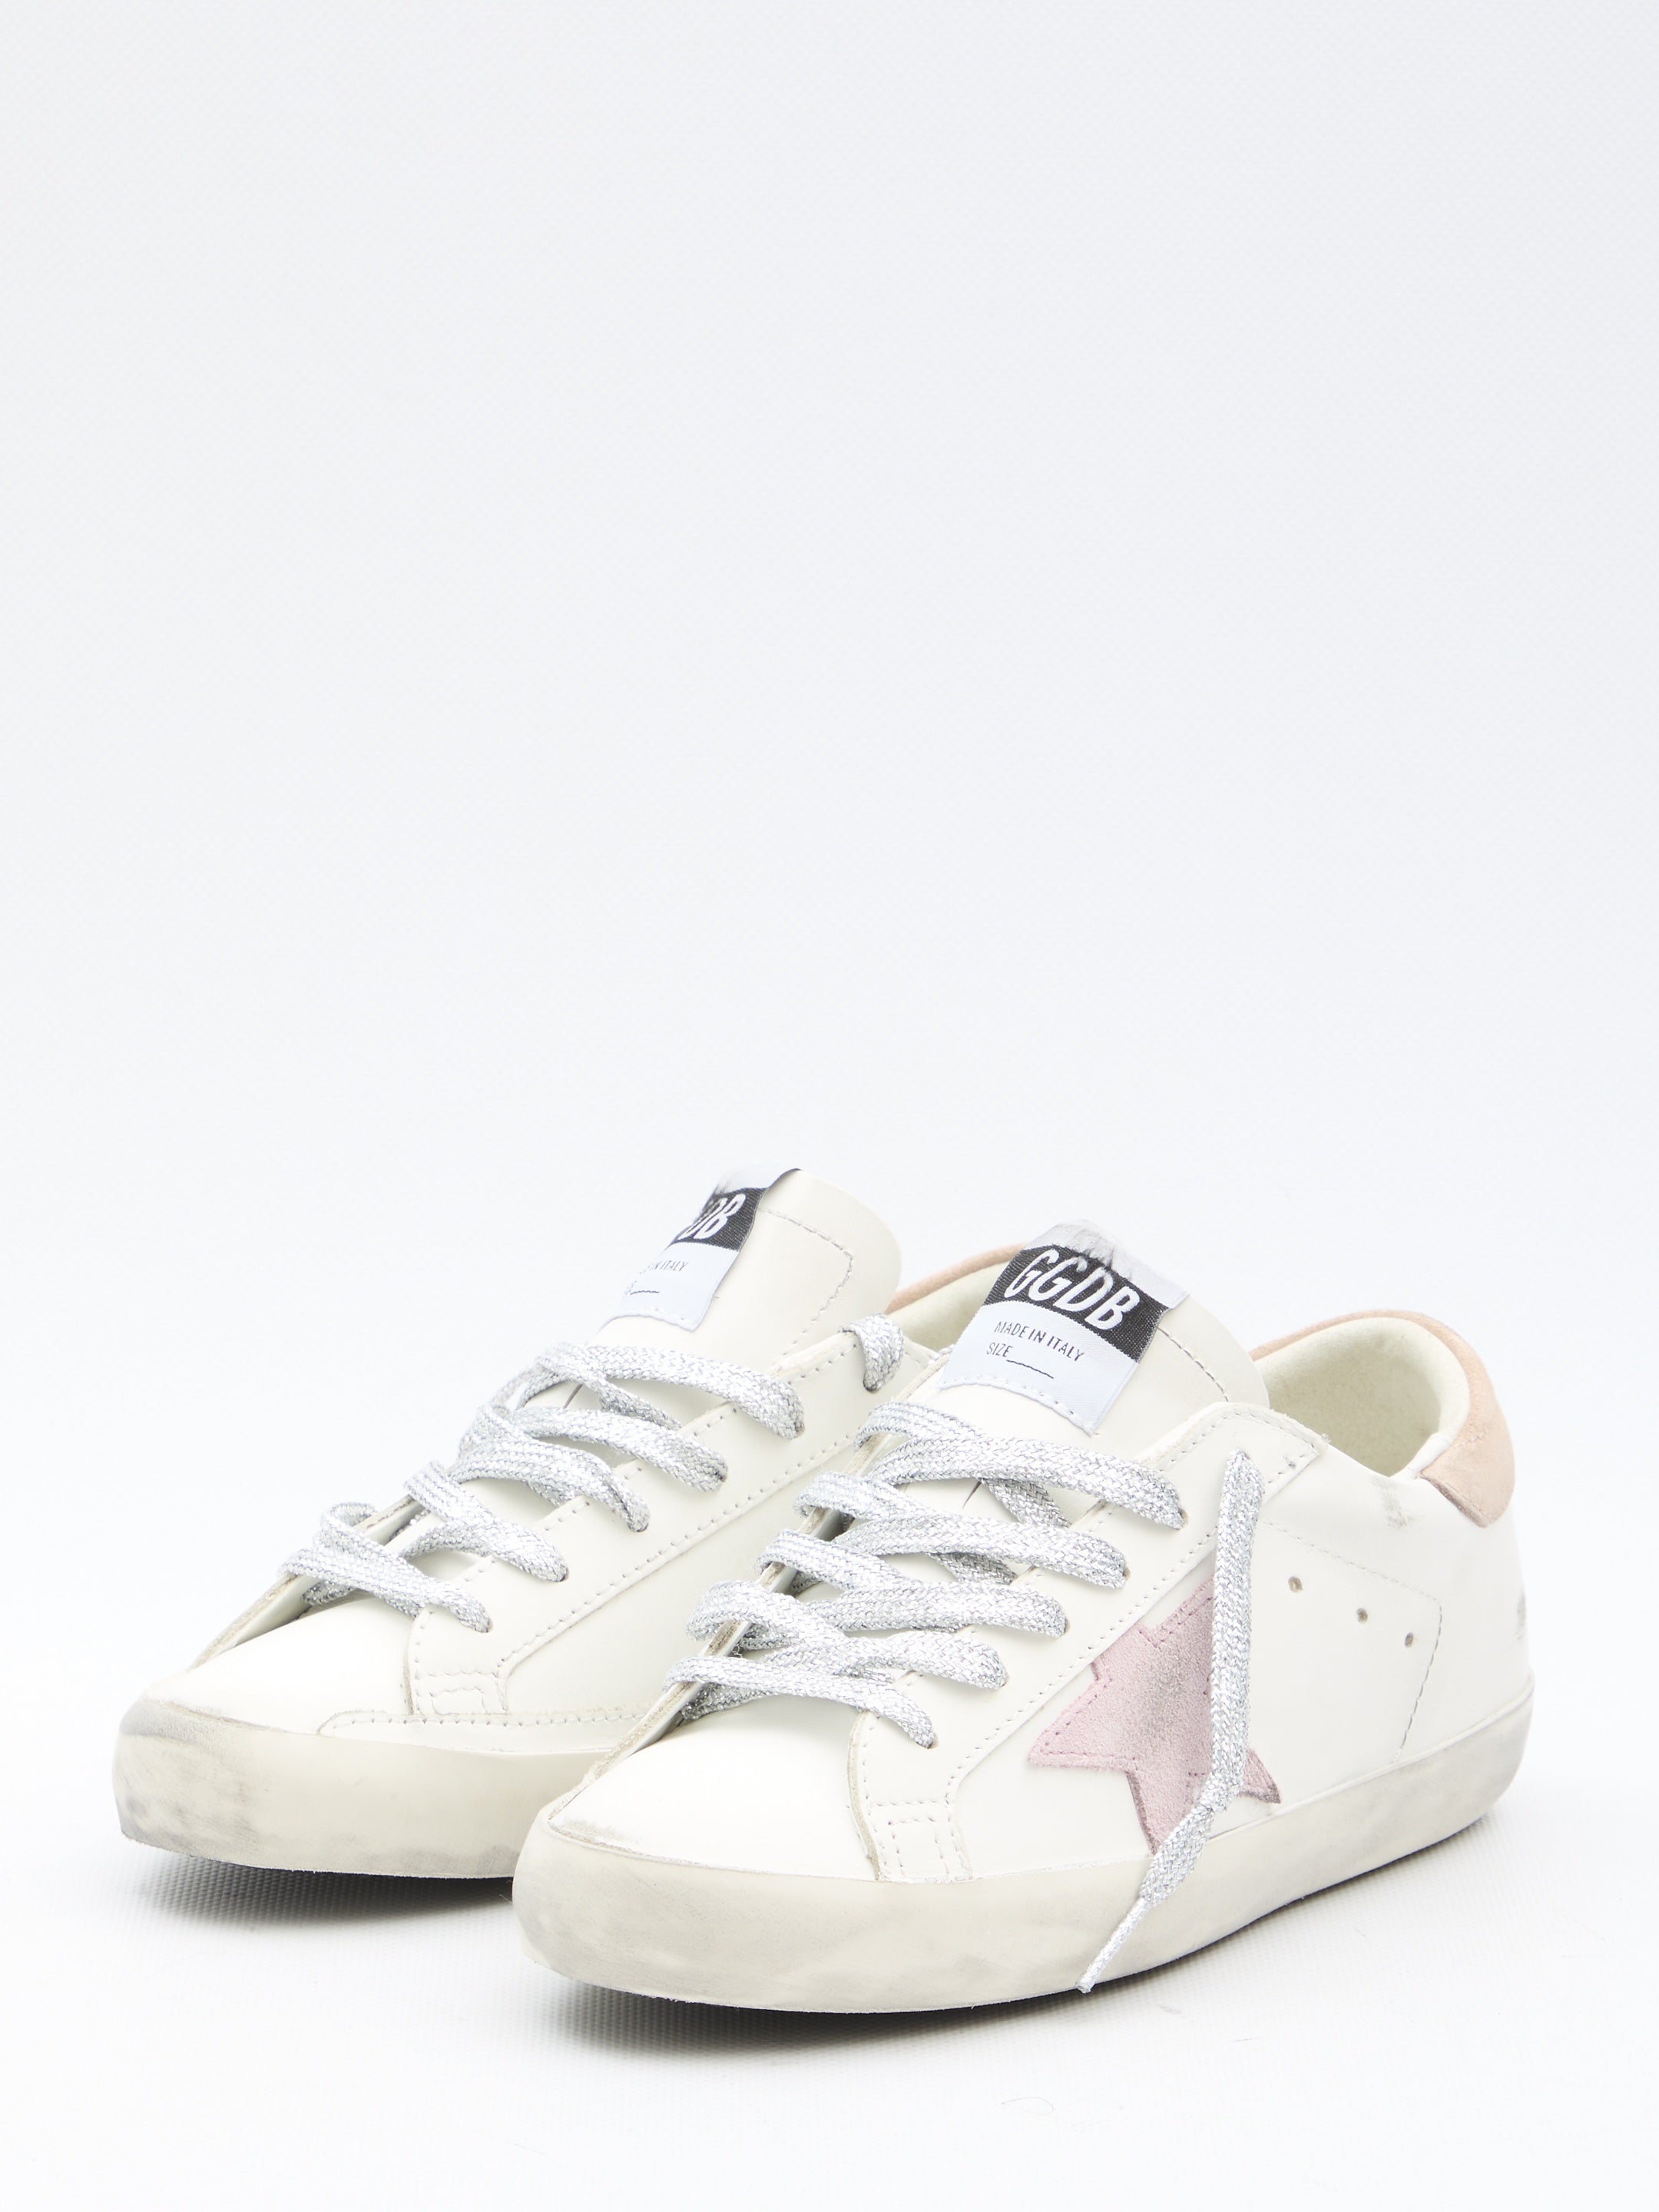 GOLDEN-GOOSE-OUTLET-SALE-Super-Star-sneakers-Sneakers-37-WHITE-ARCHIVE-COLLECTION-2.jpg